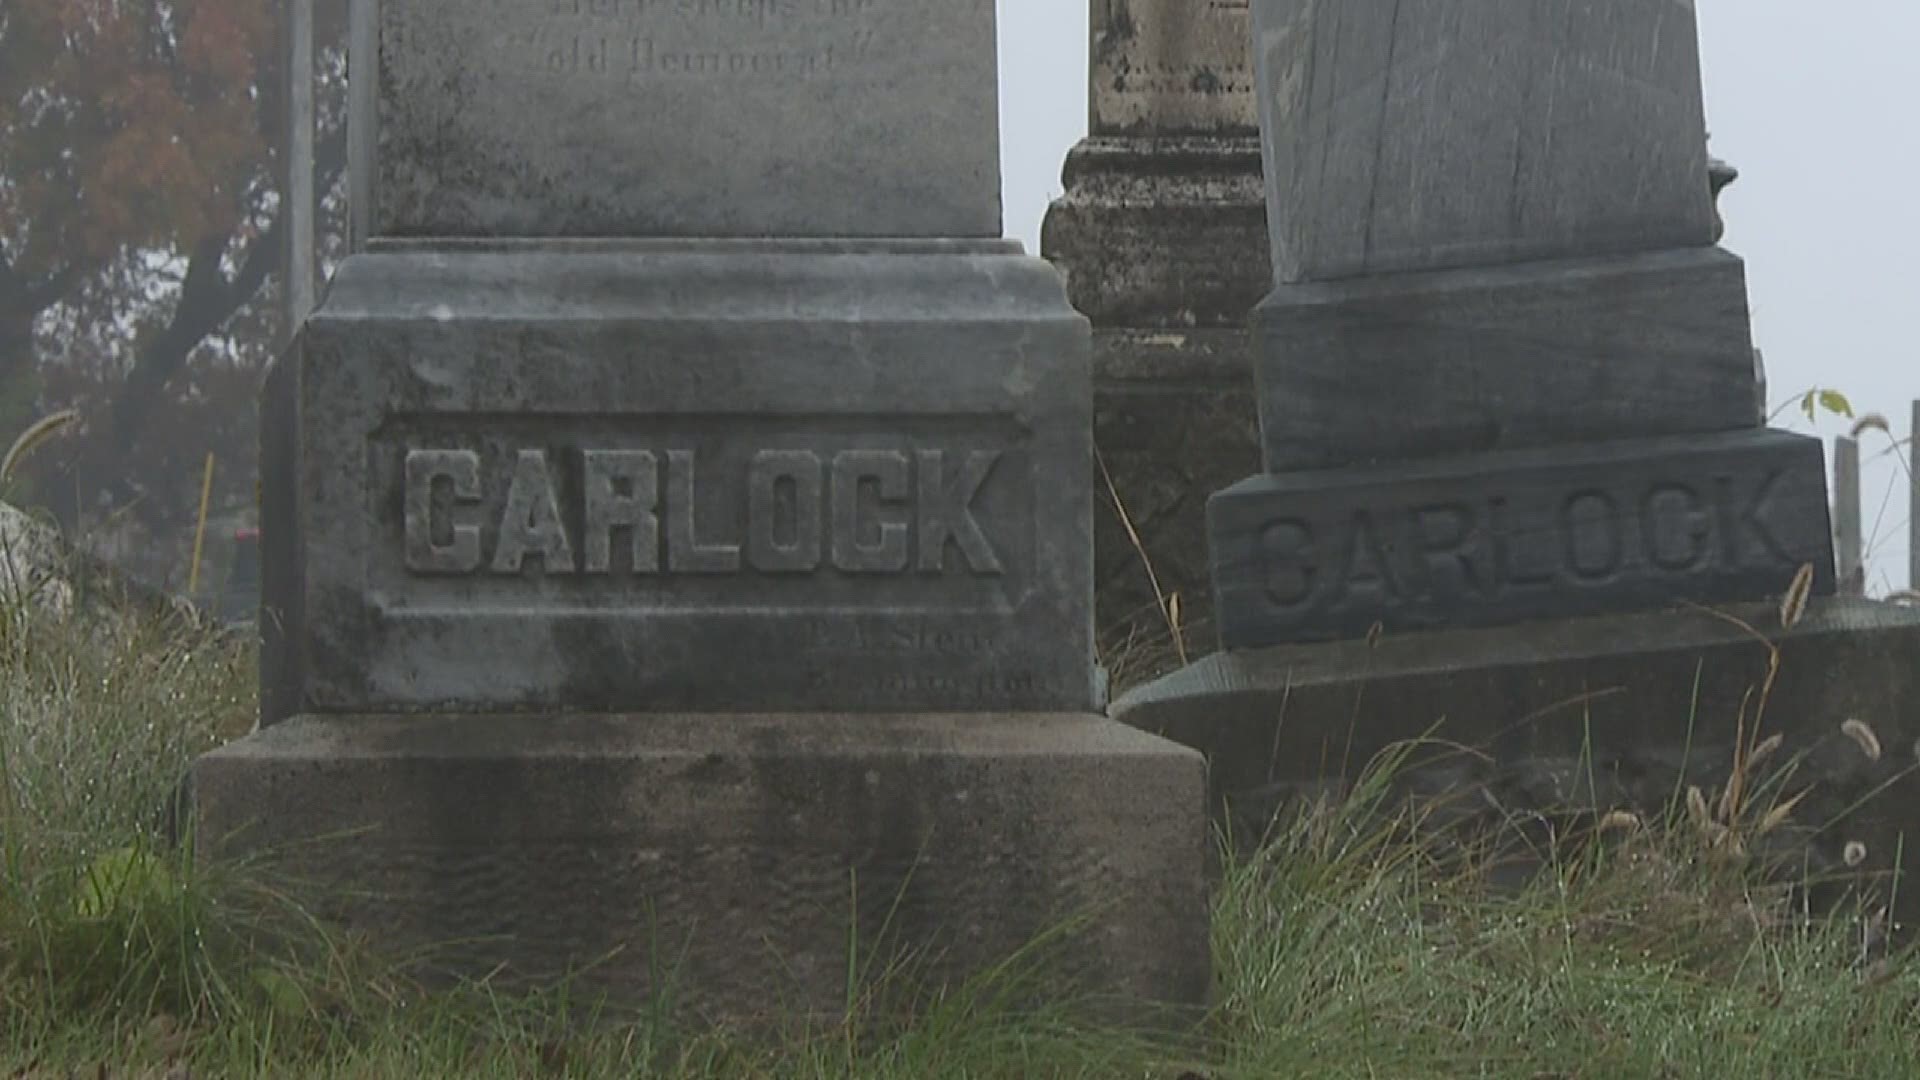 Local Democrats and Republicans established separate cemeteries in Carlock, IL more than a century ago